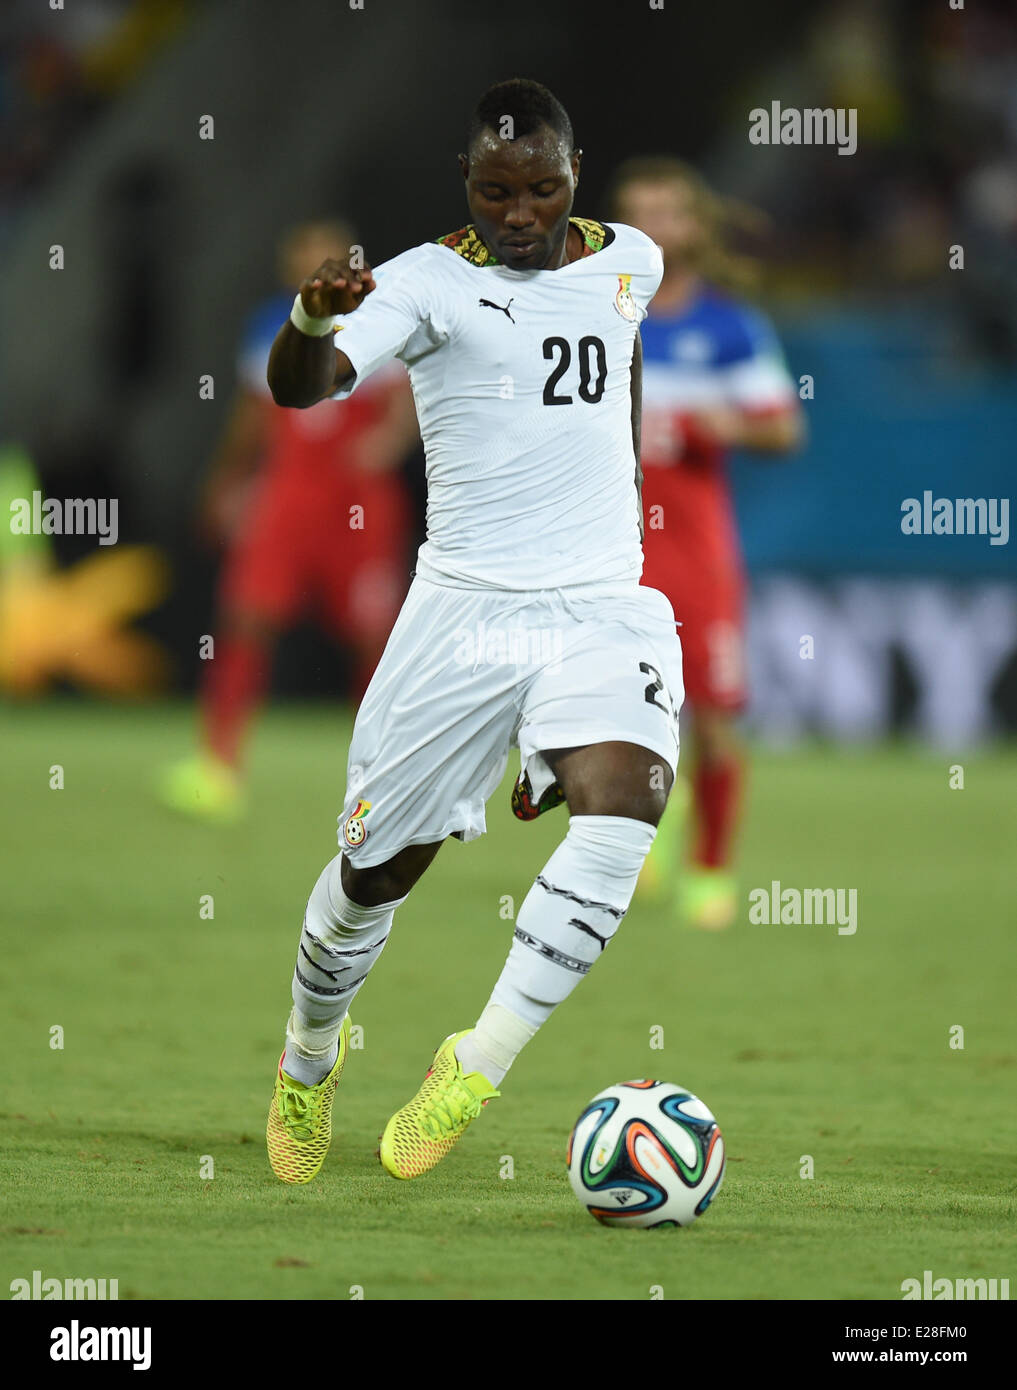 Natal, Brazil. 16th June, 2014. Kwadwo Asamoah of Ghana in action during the FIFA World Cup 2014 group G preliminary round match between Ghana and the USA at the Estadio Arena das Dunas Stadium in Natal, Brazil, 16 June 2014. Credit:  dpa picture alliance/Alamy Live News Stock Photo